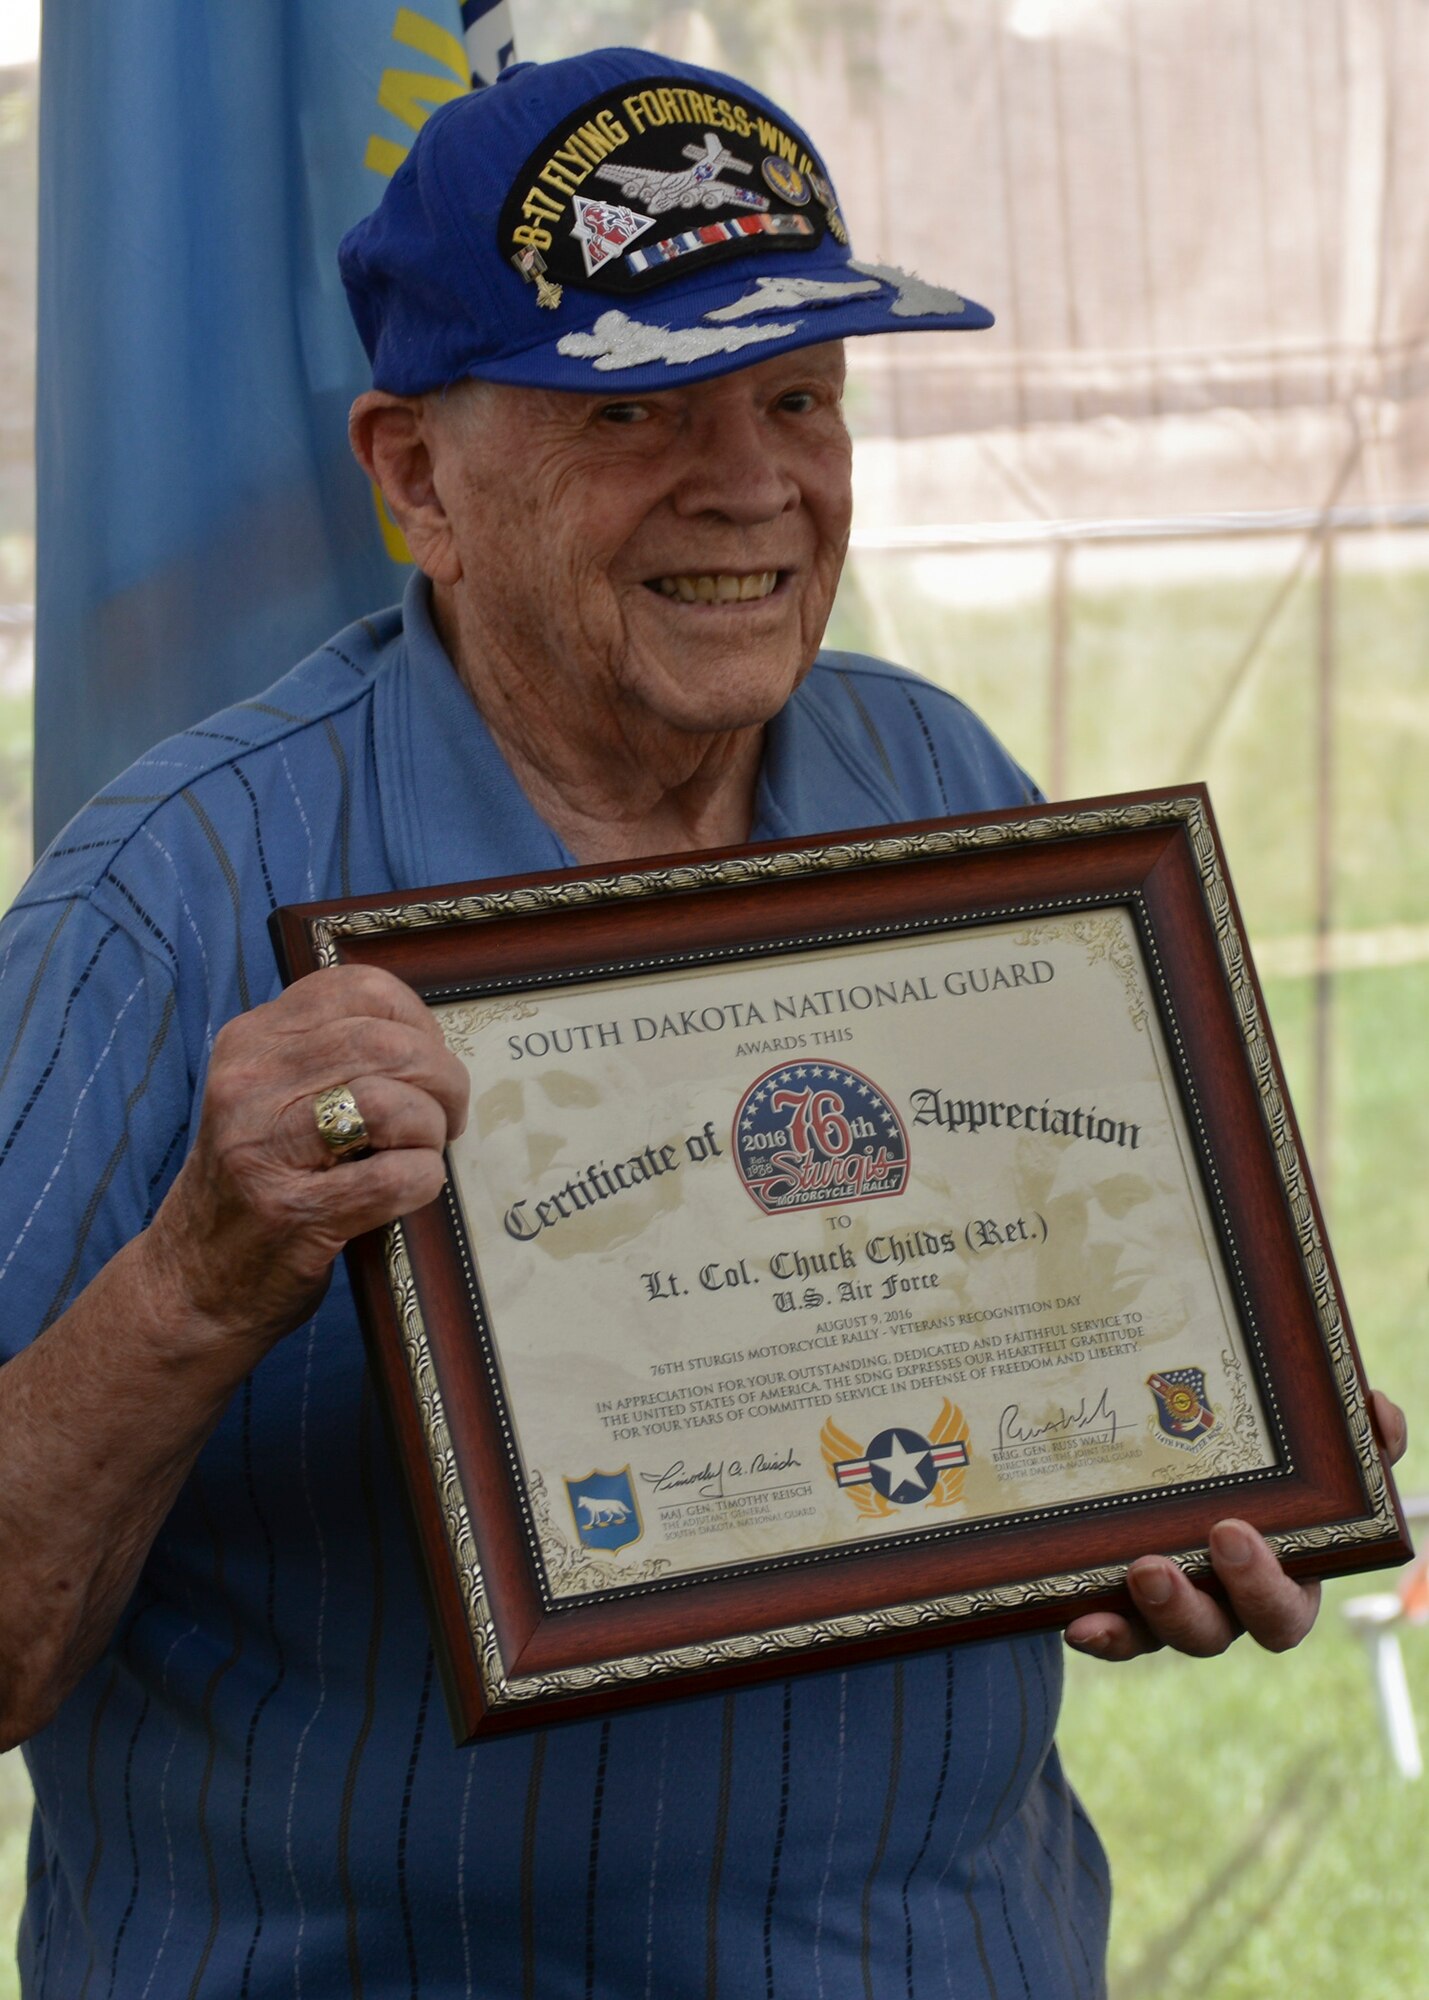 Chuck Childs, a retired Air Force Lieutenant Colonel, was one of two honored during a veterans recognition ceremony at Sturgis, S.D., Aug. 9, 2016. Childs is a WWII and Korean War veteran who earned two Distinguished Flying Crosses flying a B-17 Flying Fortress against the Third Reich. (U.S. Air Force photo by Senior Airman Anania Tekurio/Released)